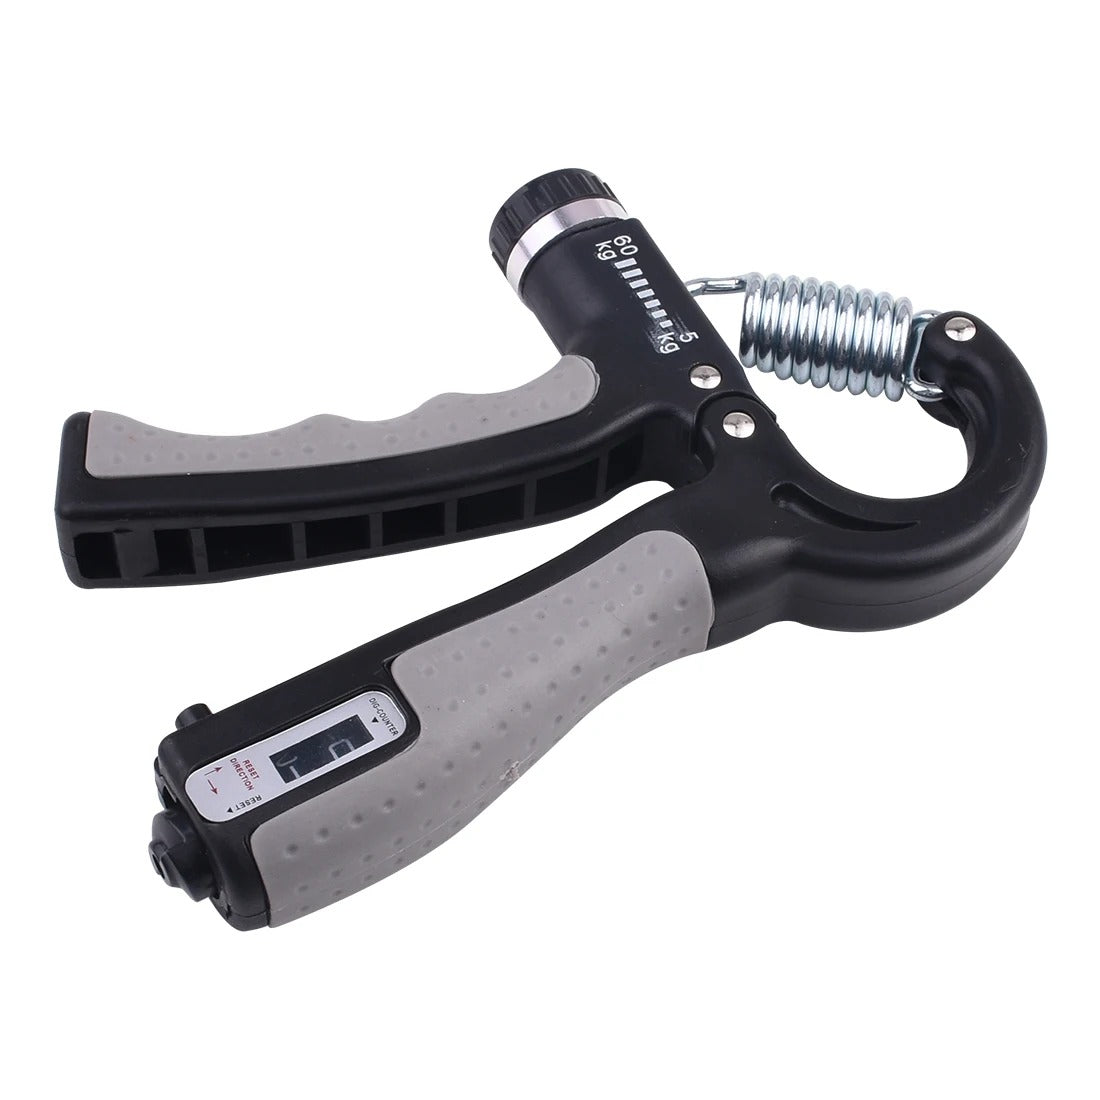 Grip Strengthener (Black with Counter Display) - Ascenssior